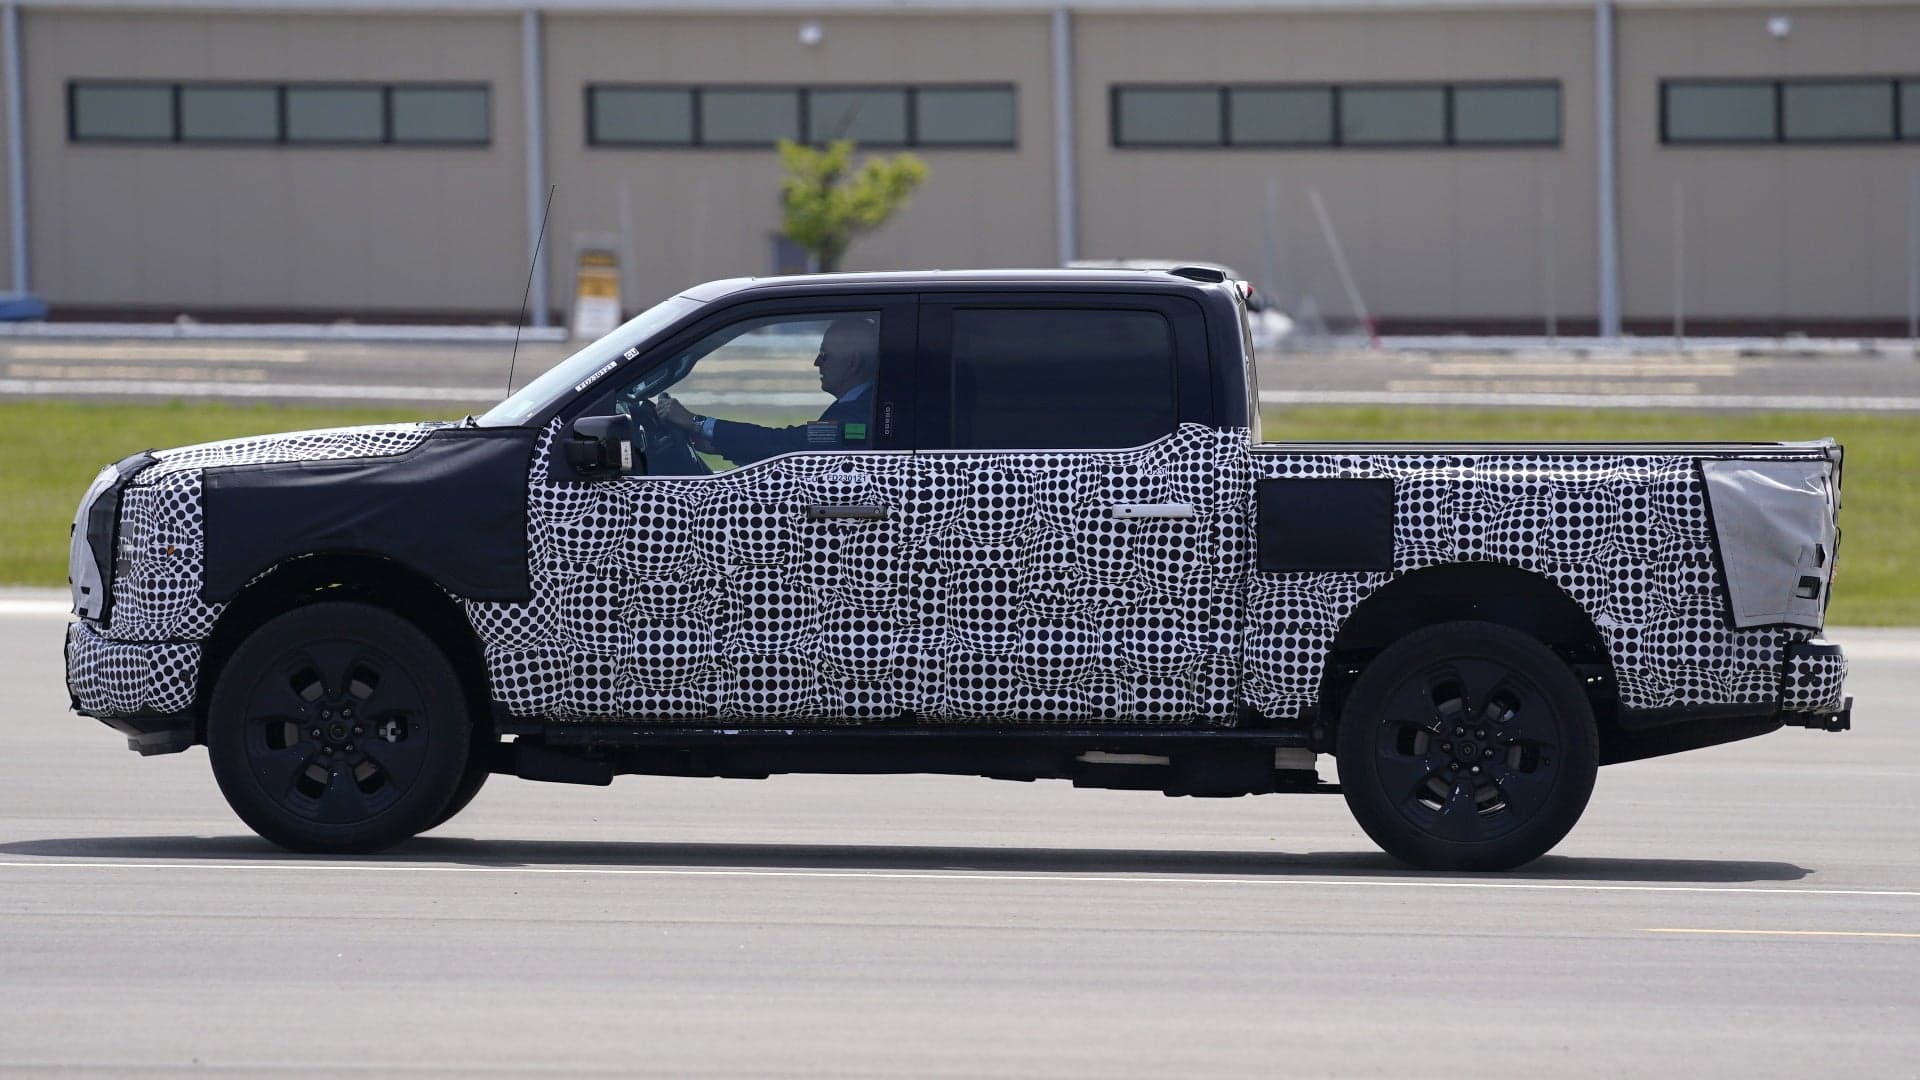 Watch President Biden Haul Ass in the Electric Ford F-150 During Unplanned Test Drive